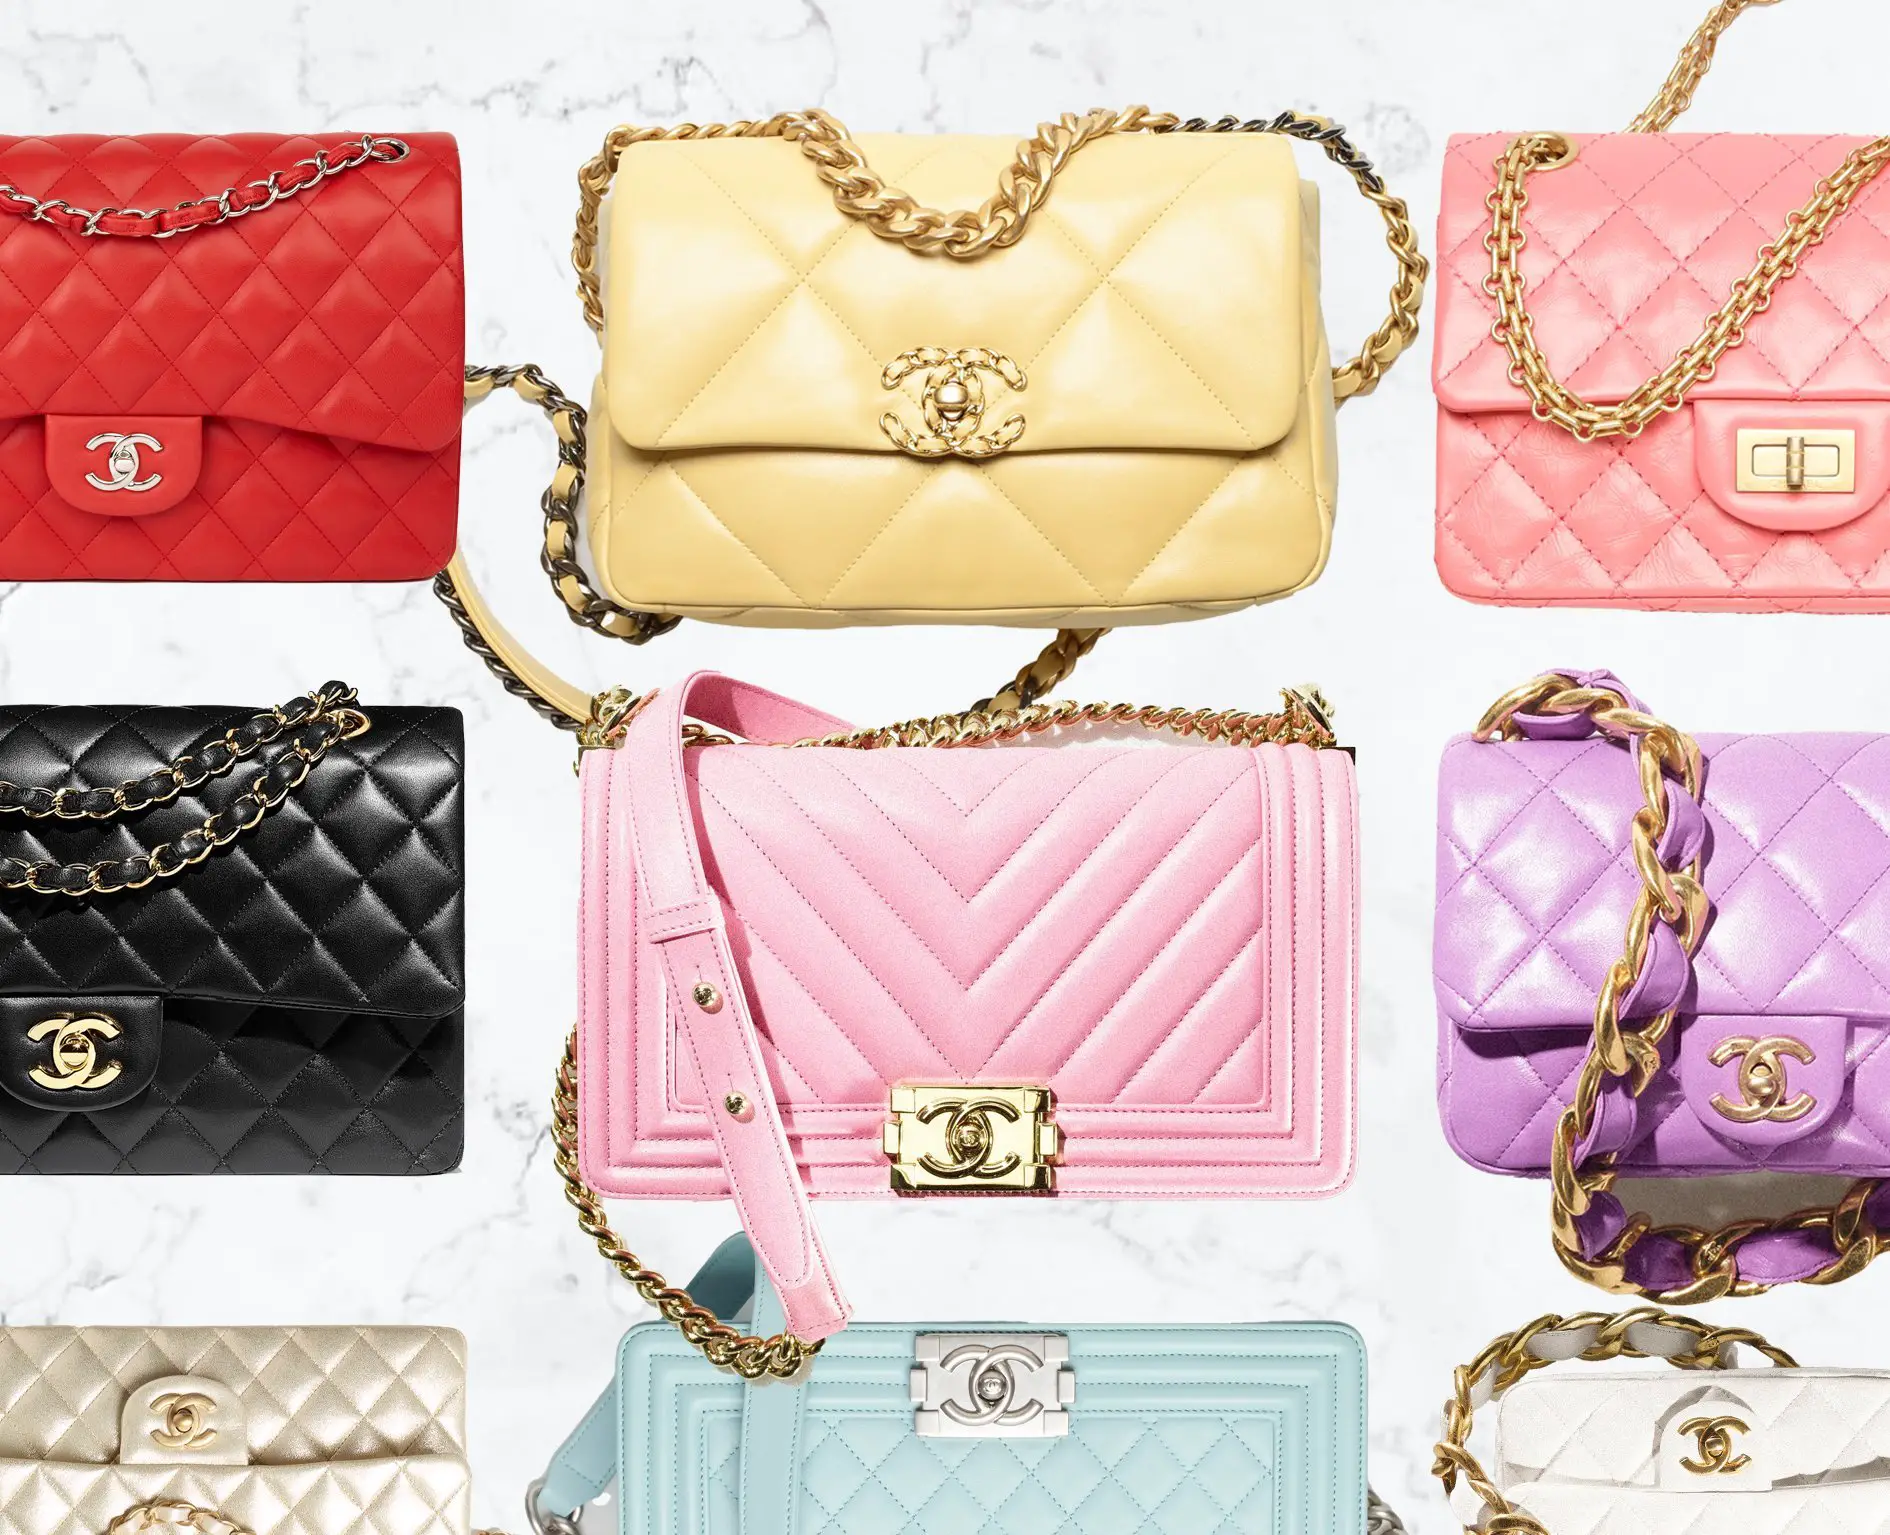 The Best First Chanel Bag  Chase Amie fashiondesignerhandbags  Chanel  bag Bags Fashion bags